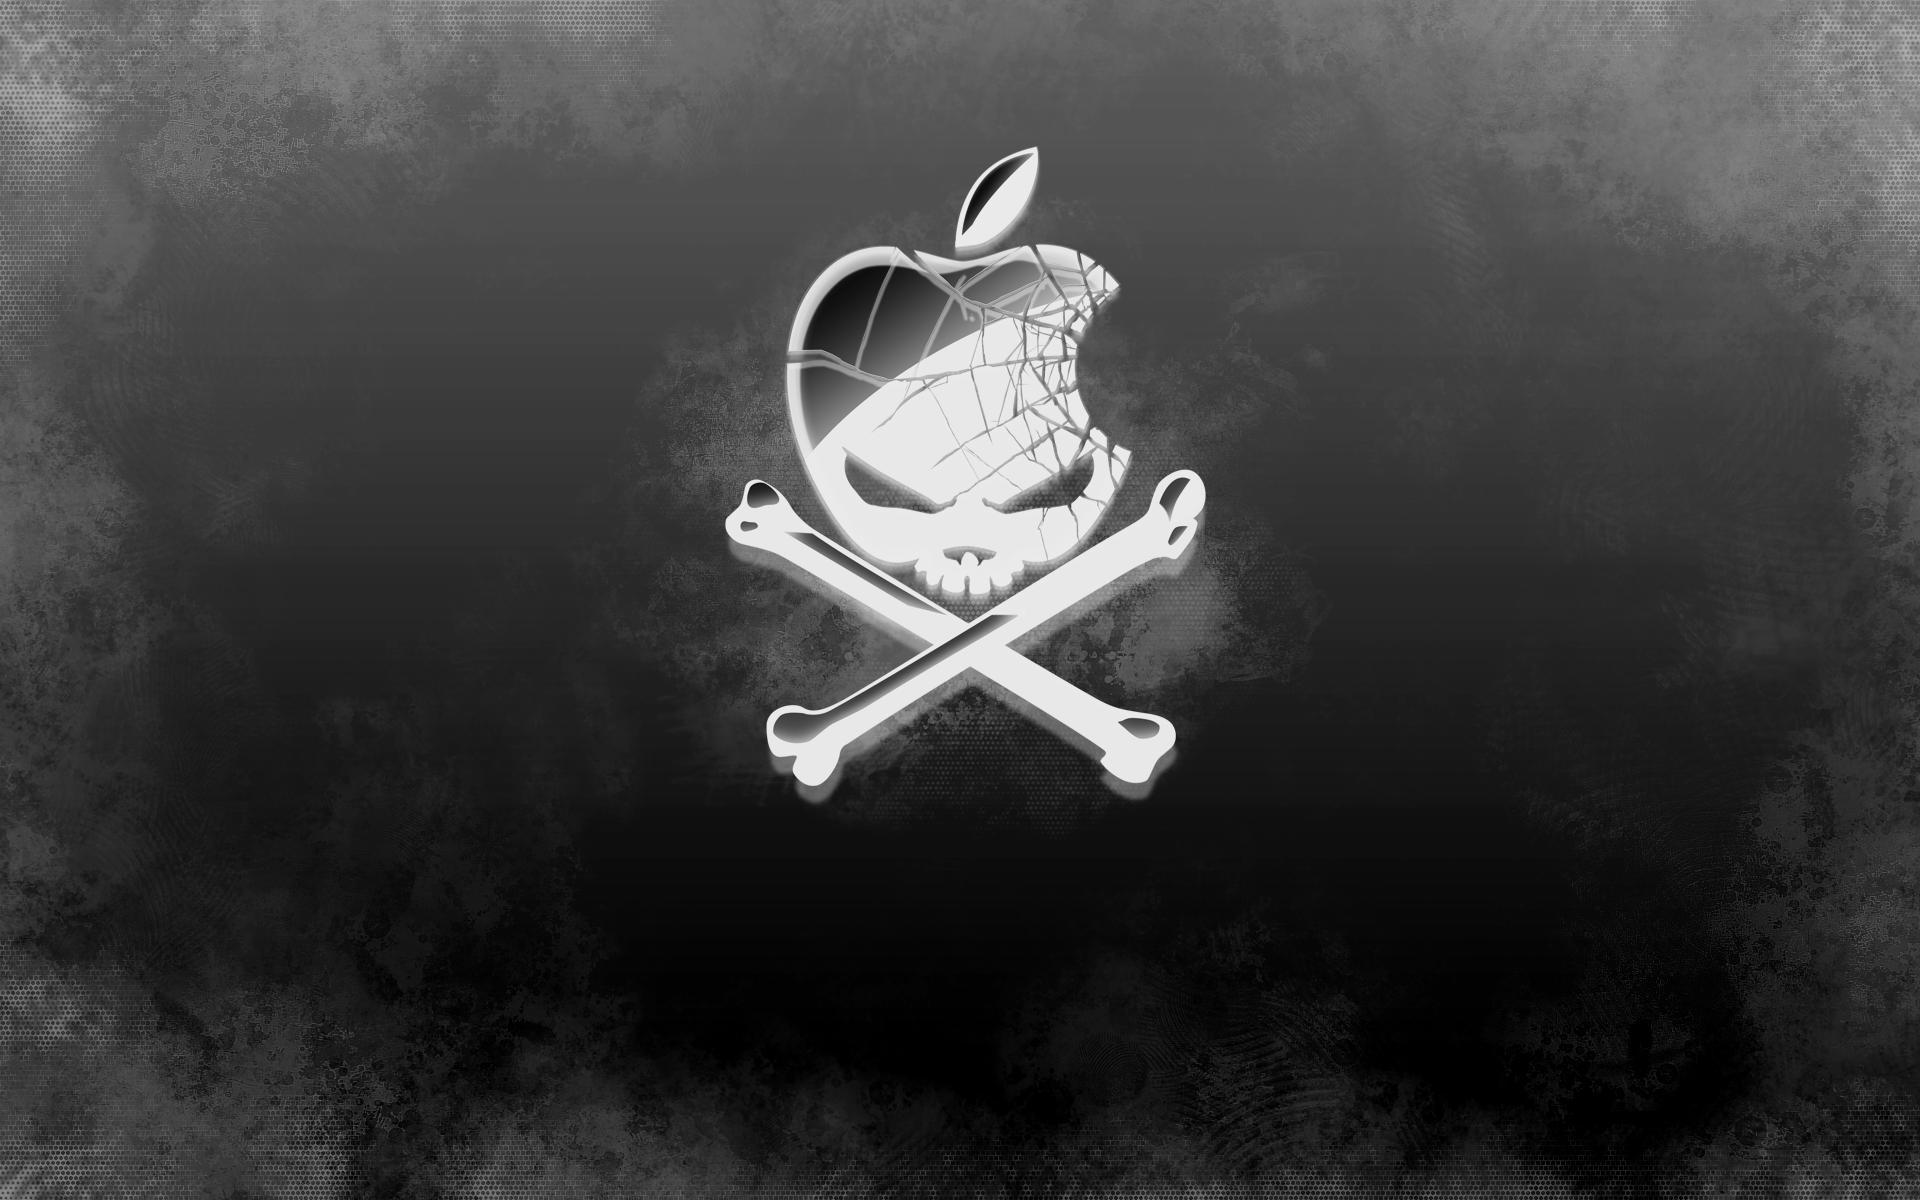 Cool Silver Logo - Cool Apple Logo Wallpapers - Wallpaper Cave